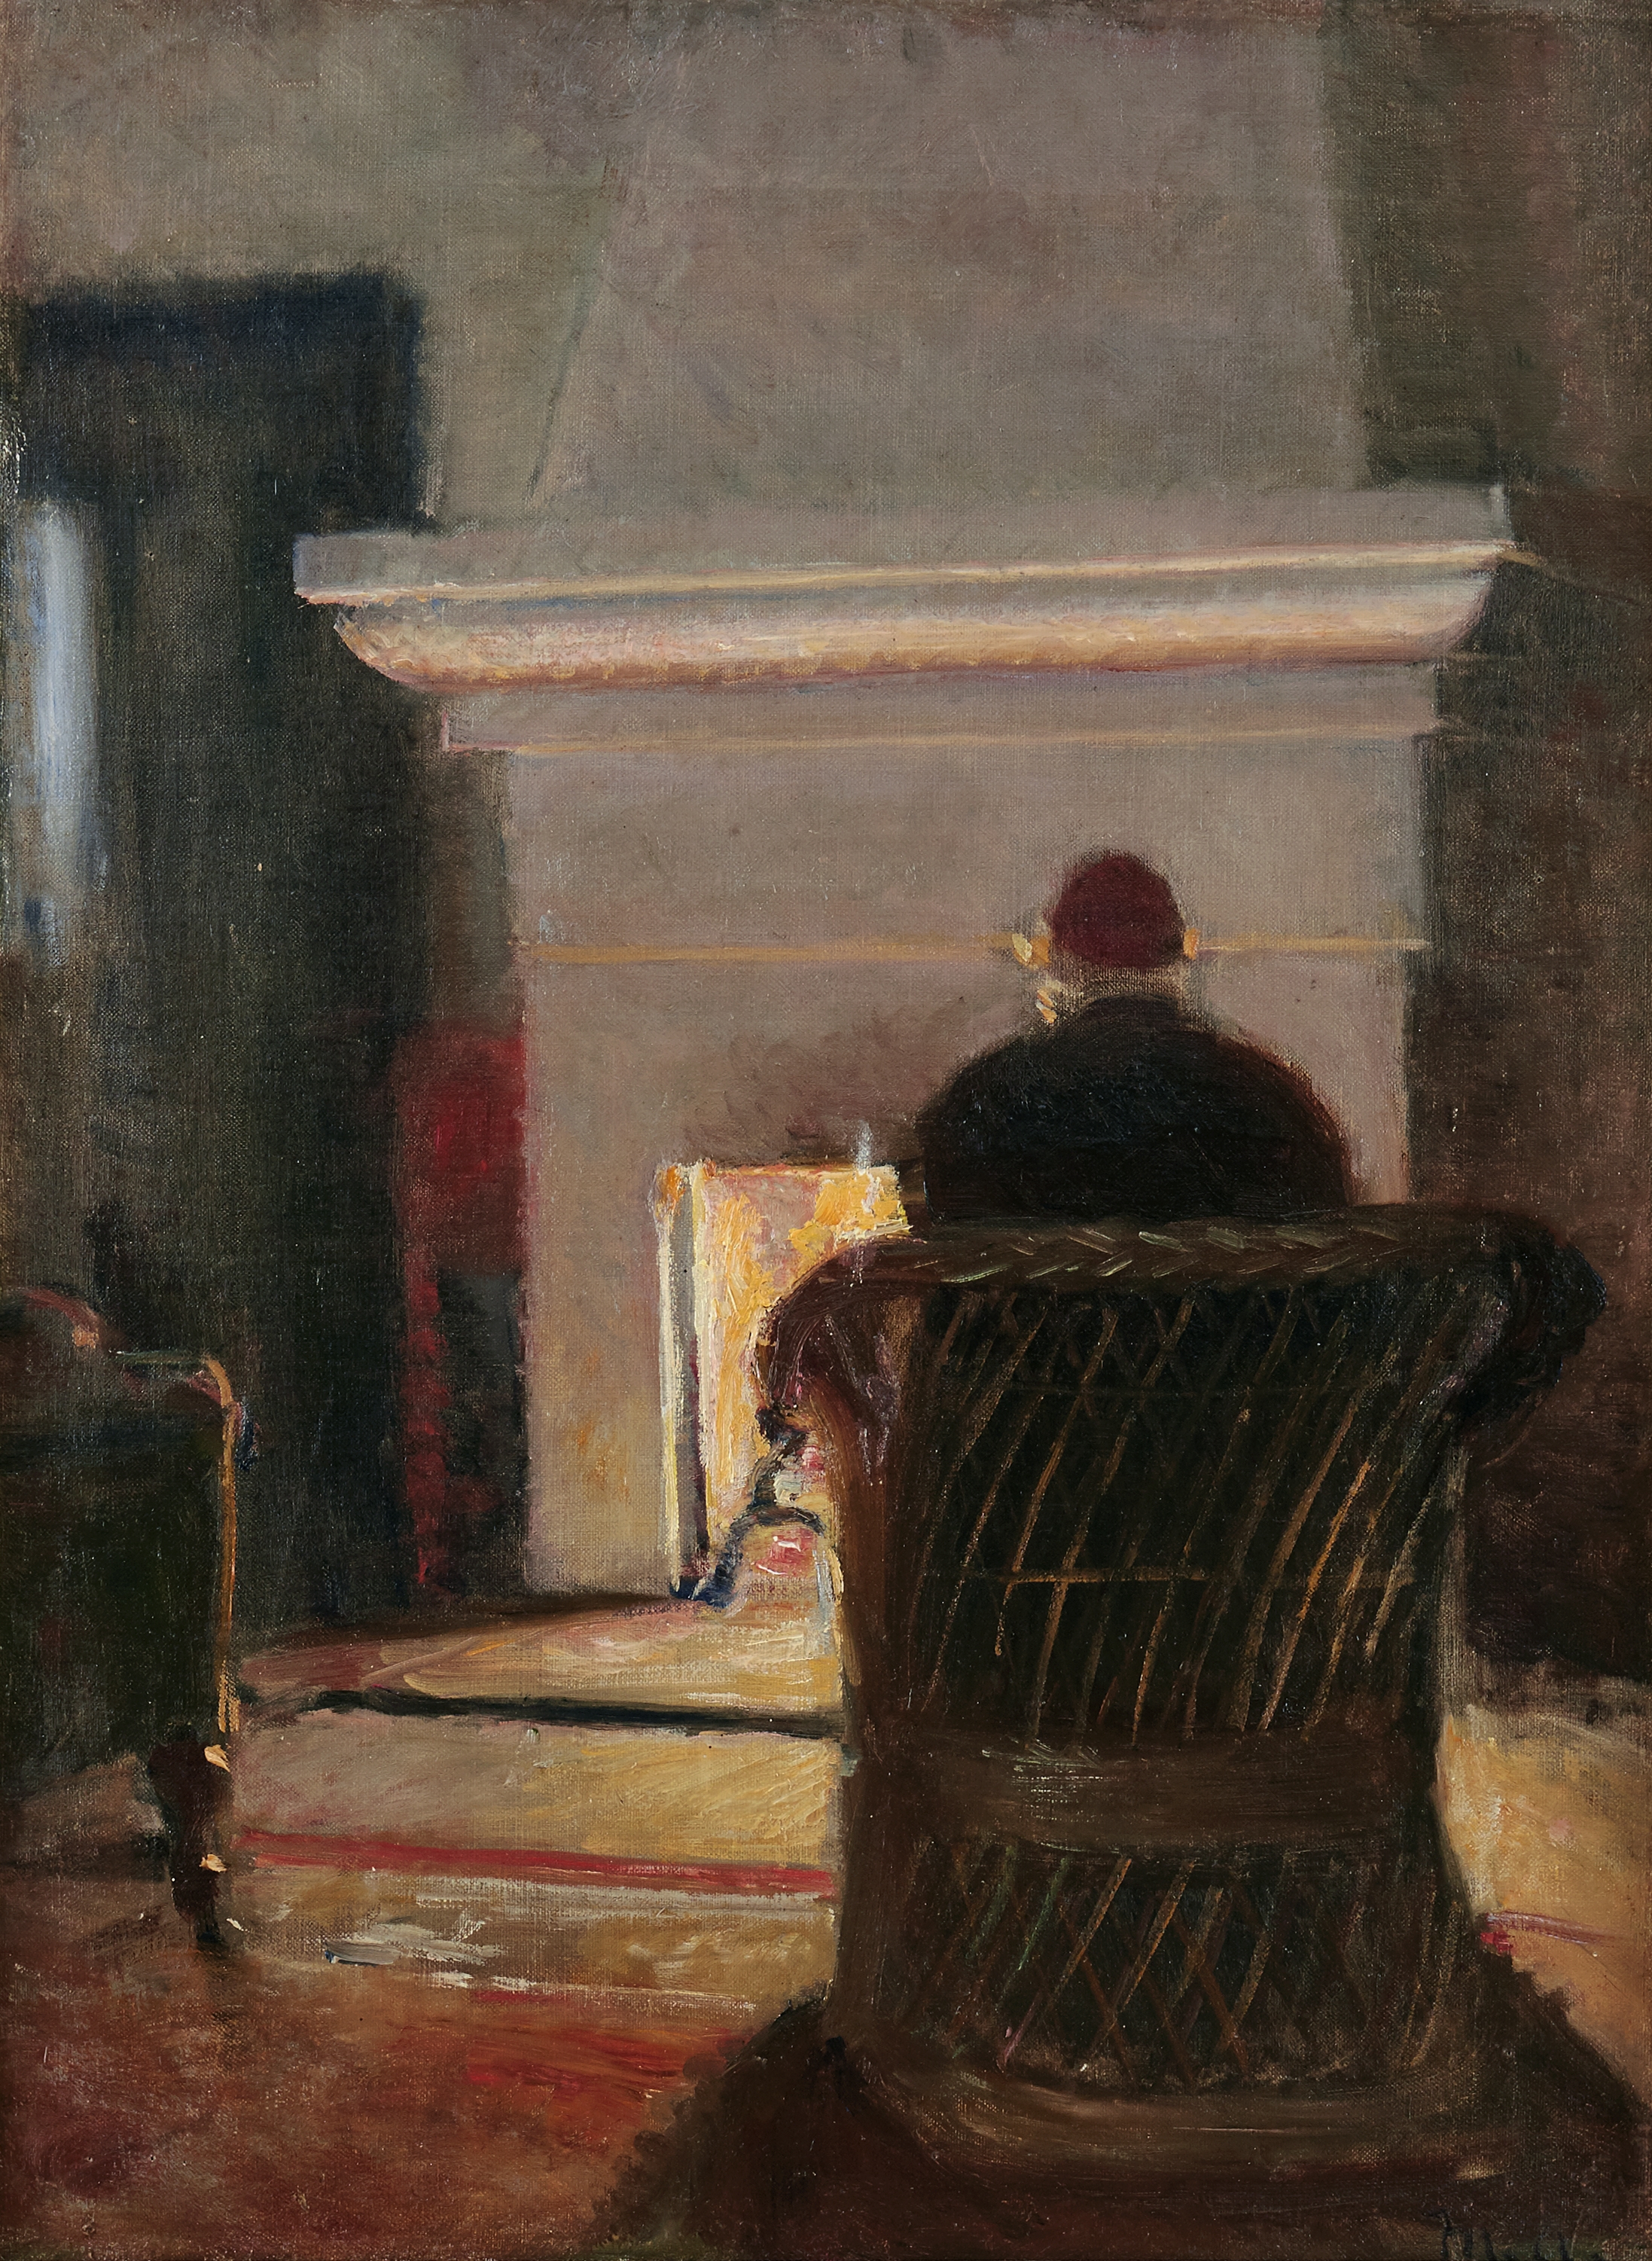 Interior with Holger Drachmann at the fireplace in Villa Pax, Skagen by Michael Peter Ancher